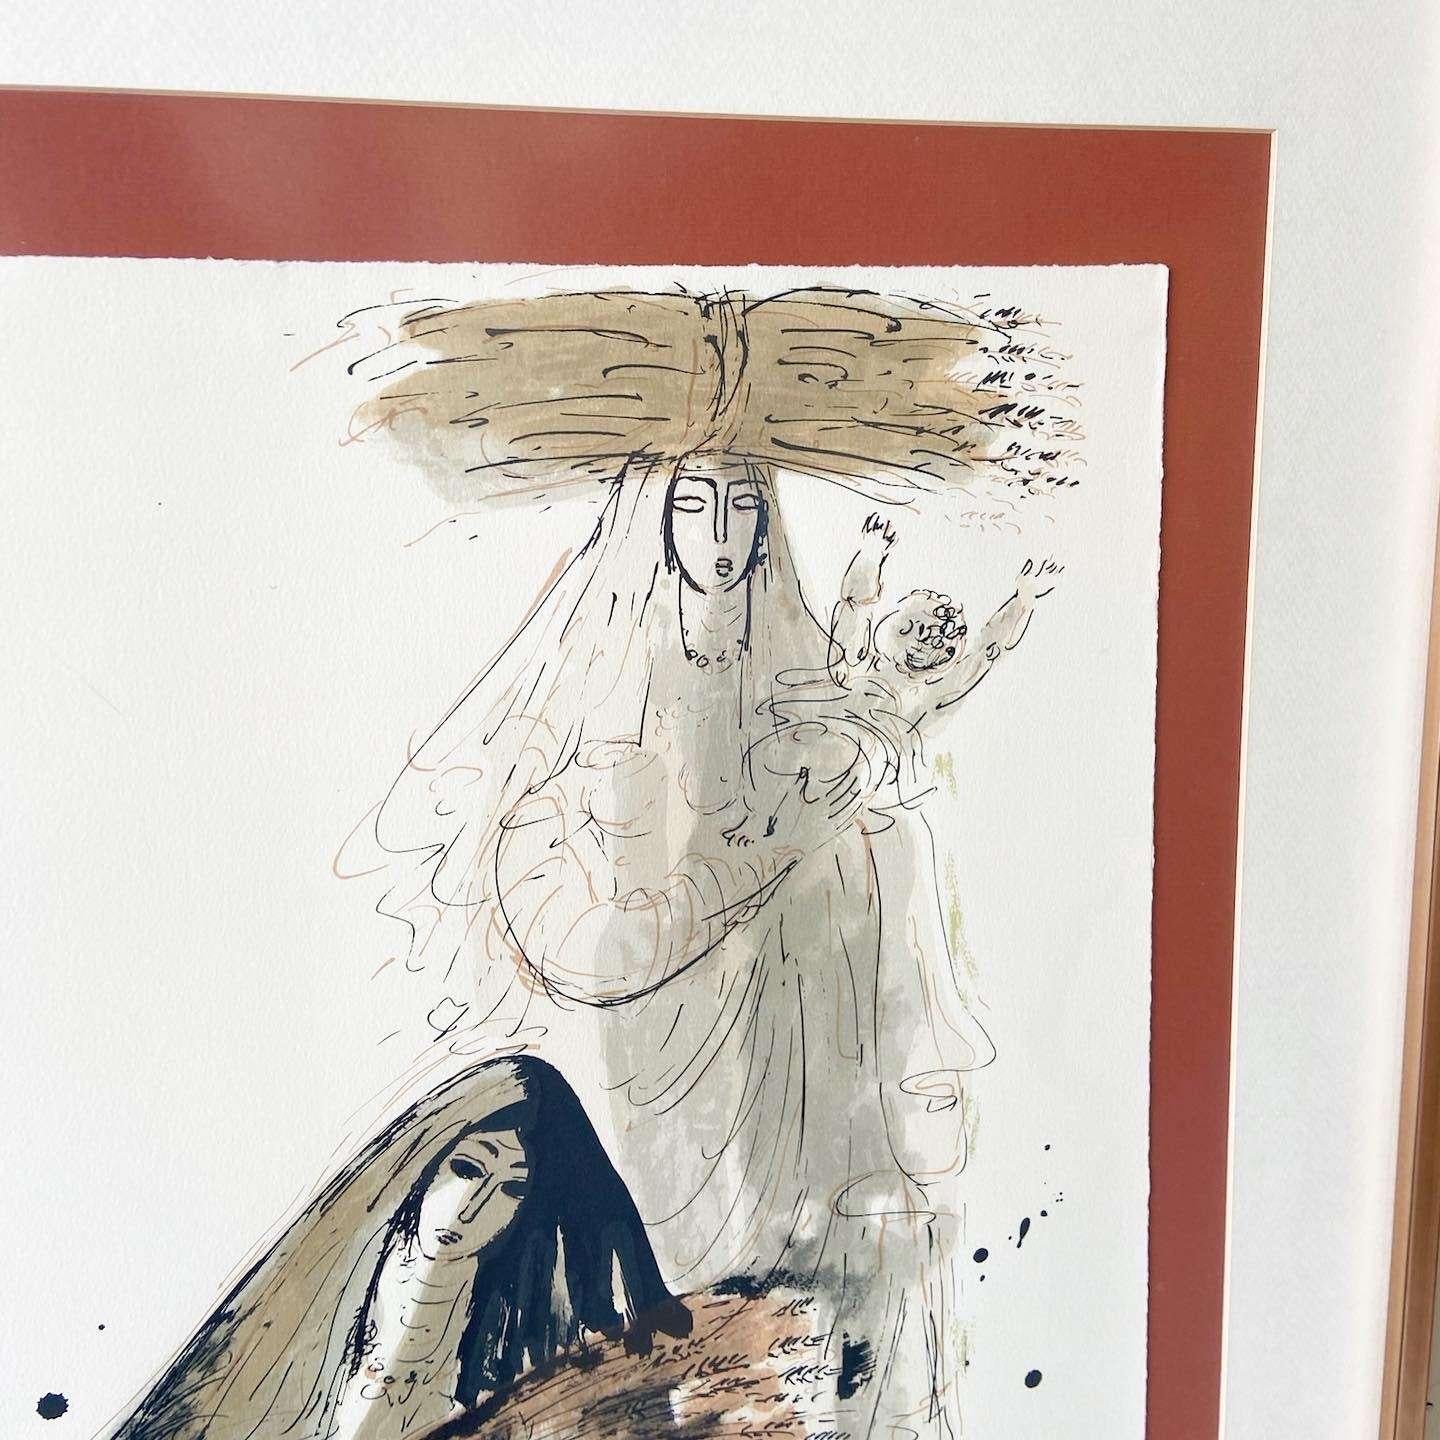 Framed Signed Lithograph “Two Women and a Child” by Reuven Rubin In Good Condition For Sale In Delray Beach, FL